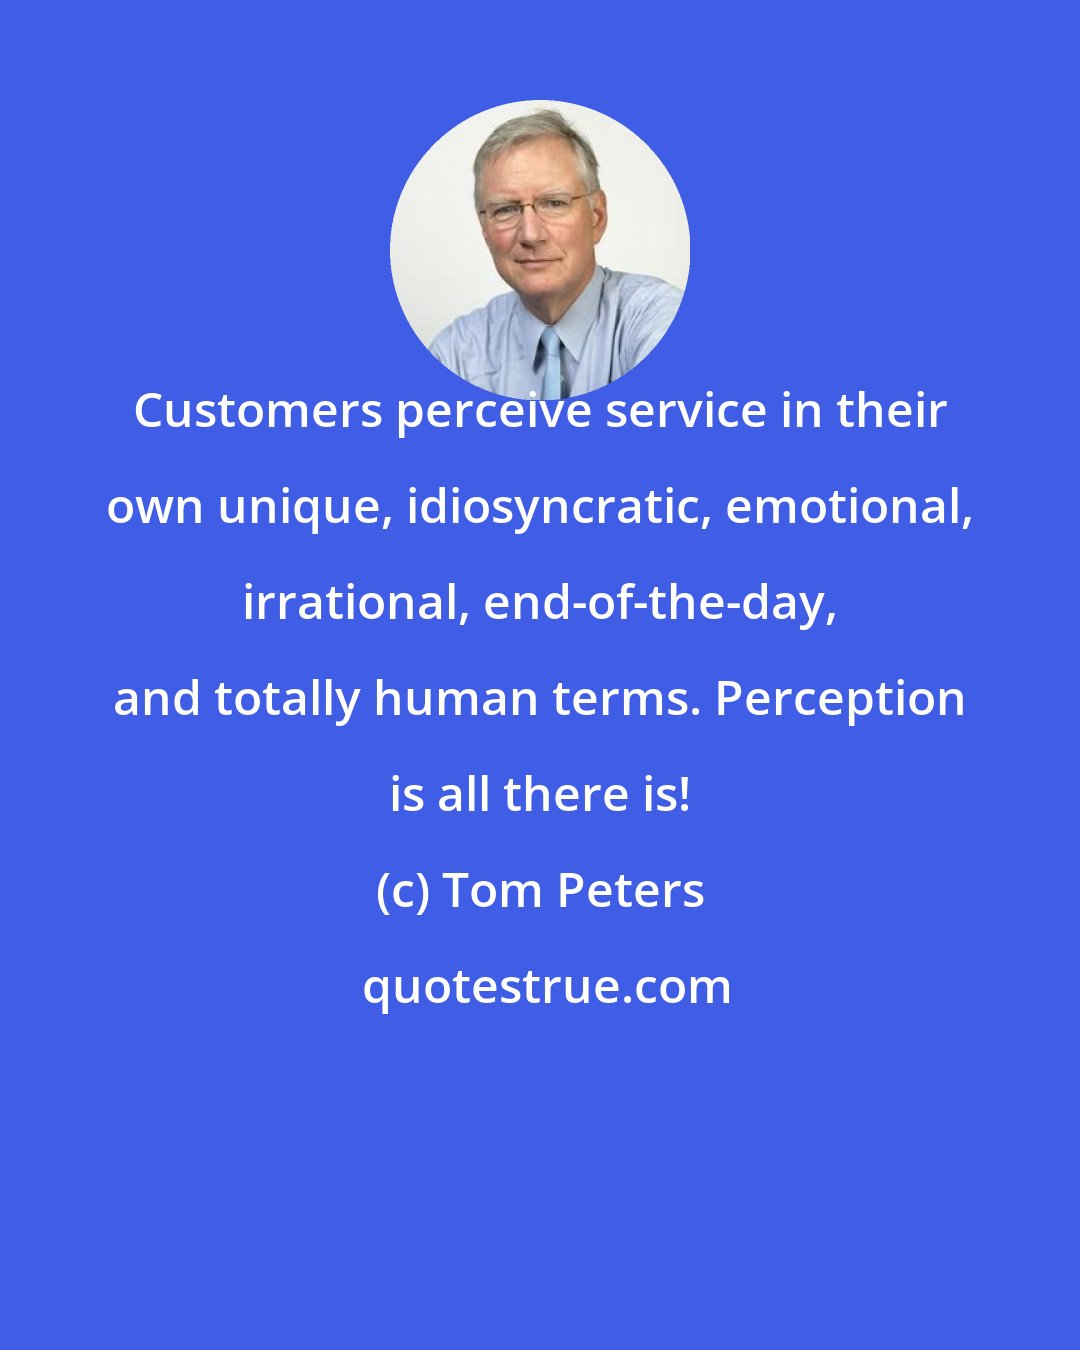 Tom Peters: Customers perceive service in their own unique, idiosyncratic, emotional, irrational, end-of-the-day, and totally human terms. Perception is all there is!